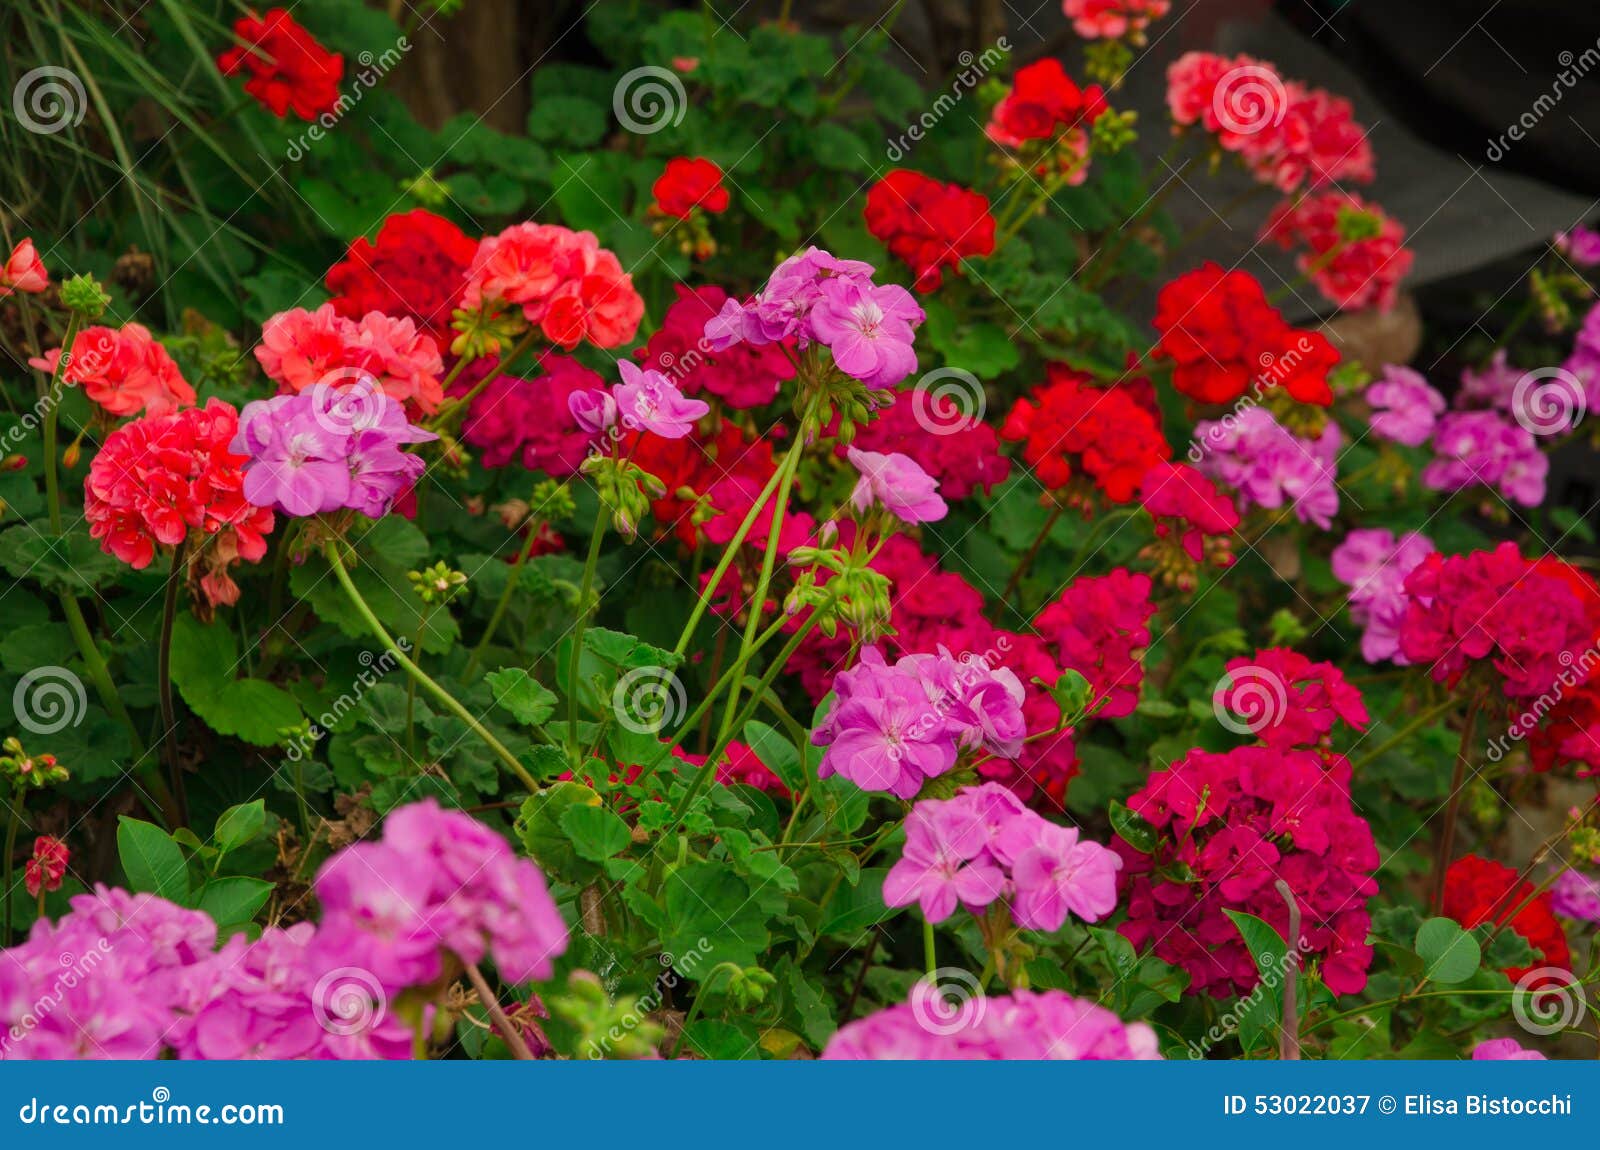 Flowers of a Red and Pink Geranium Stock Image - Image of geranium ...